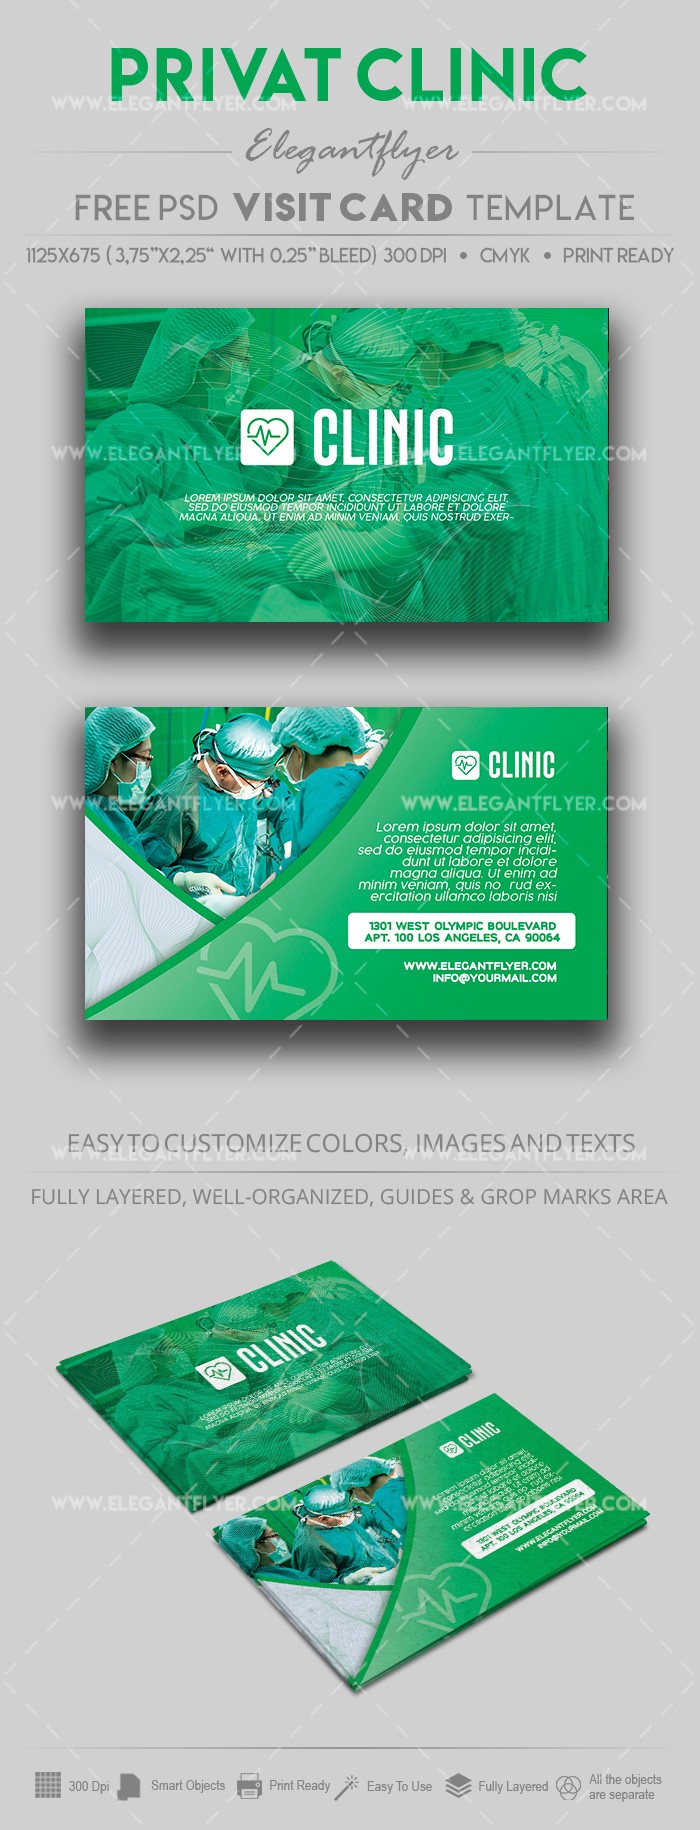 Private Clinic by ElegantFlyer